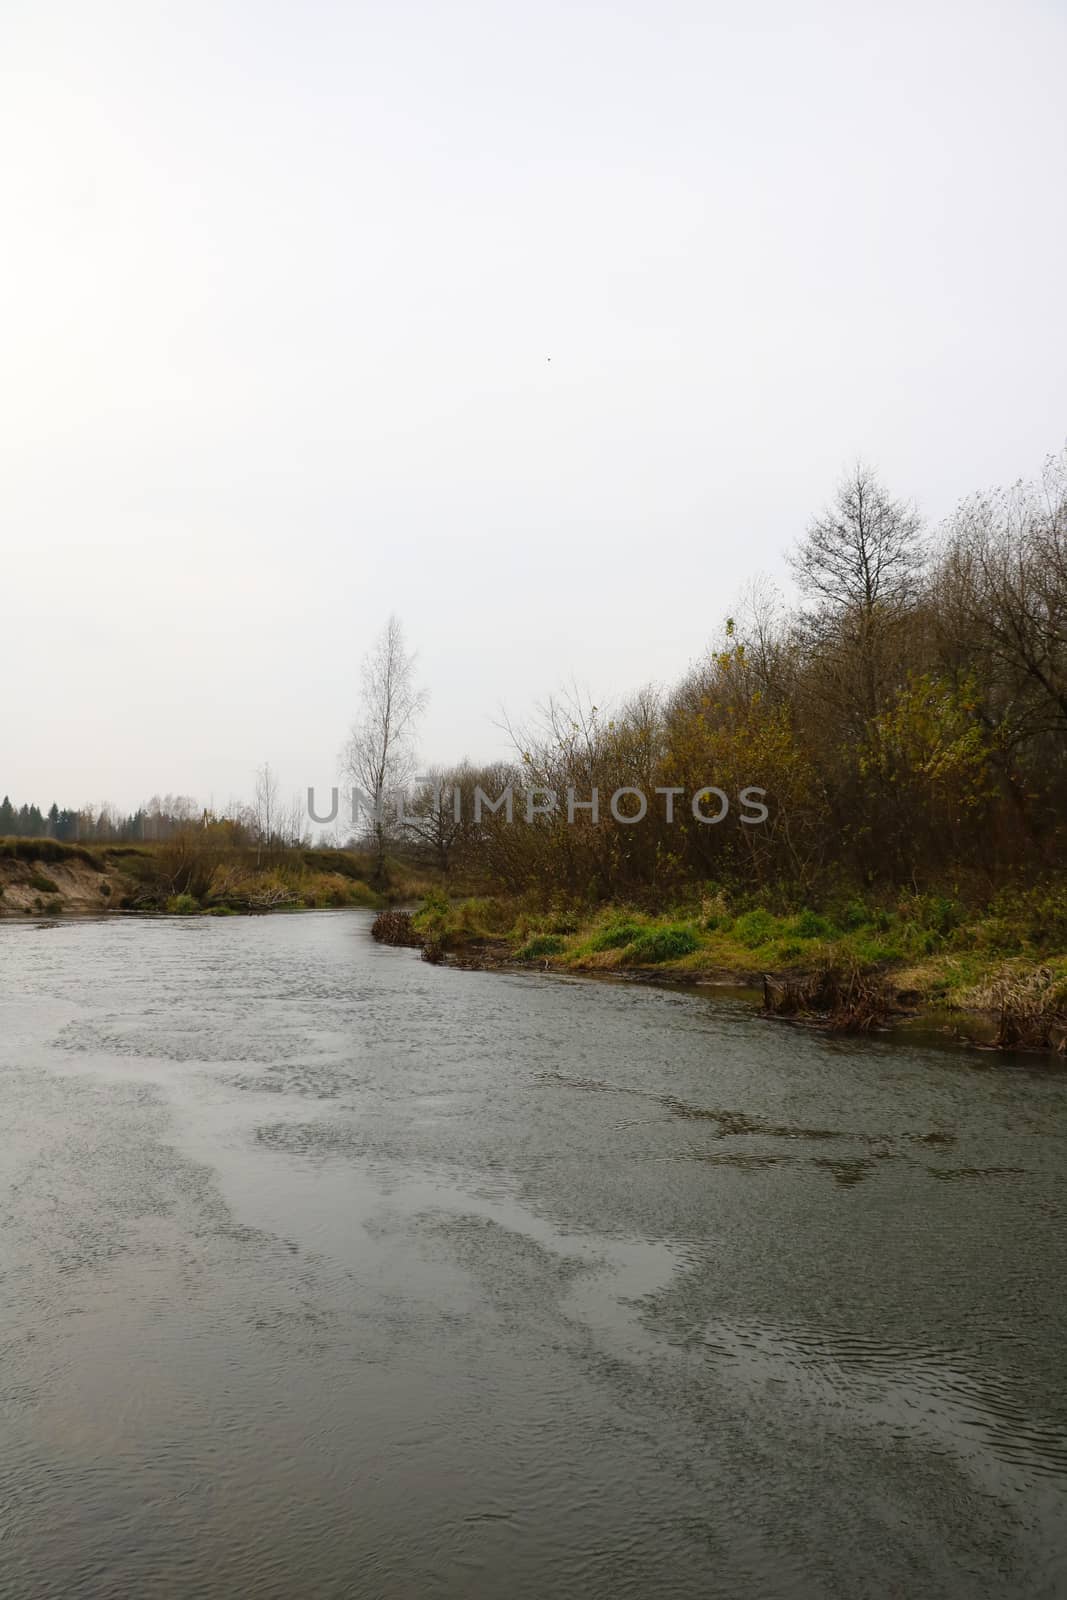 Small meandering river on a rainy autumn day. by kip02kas